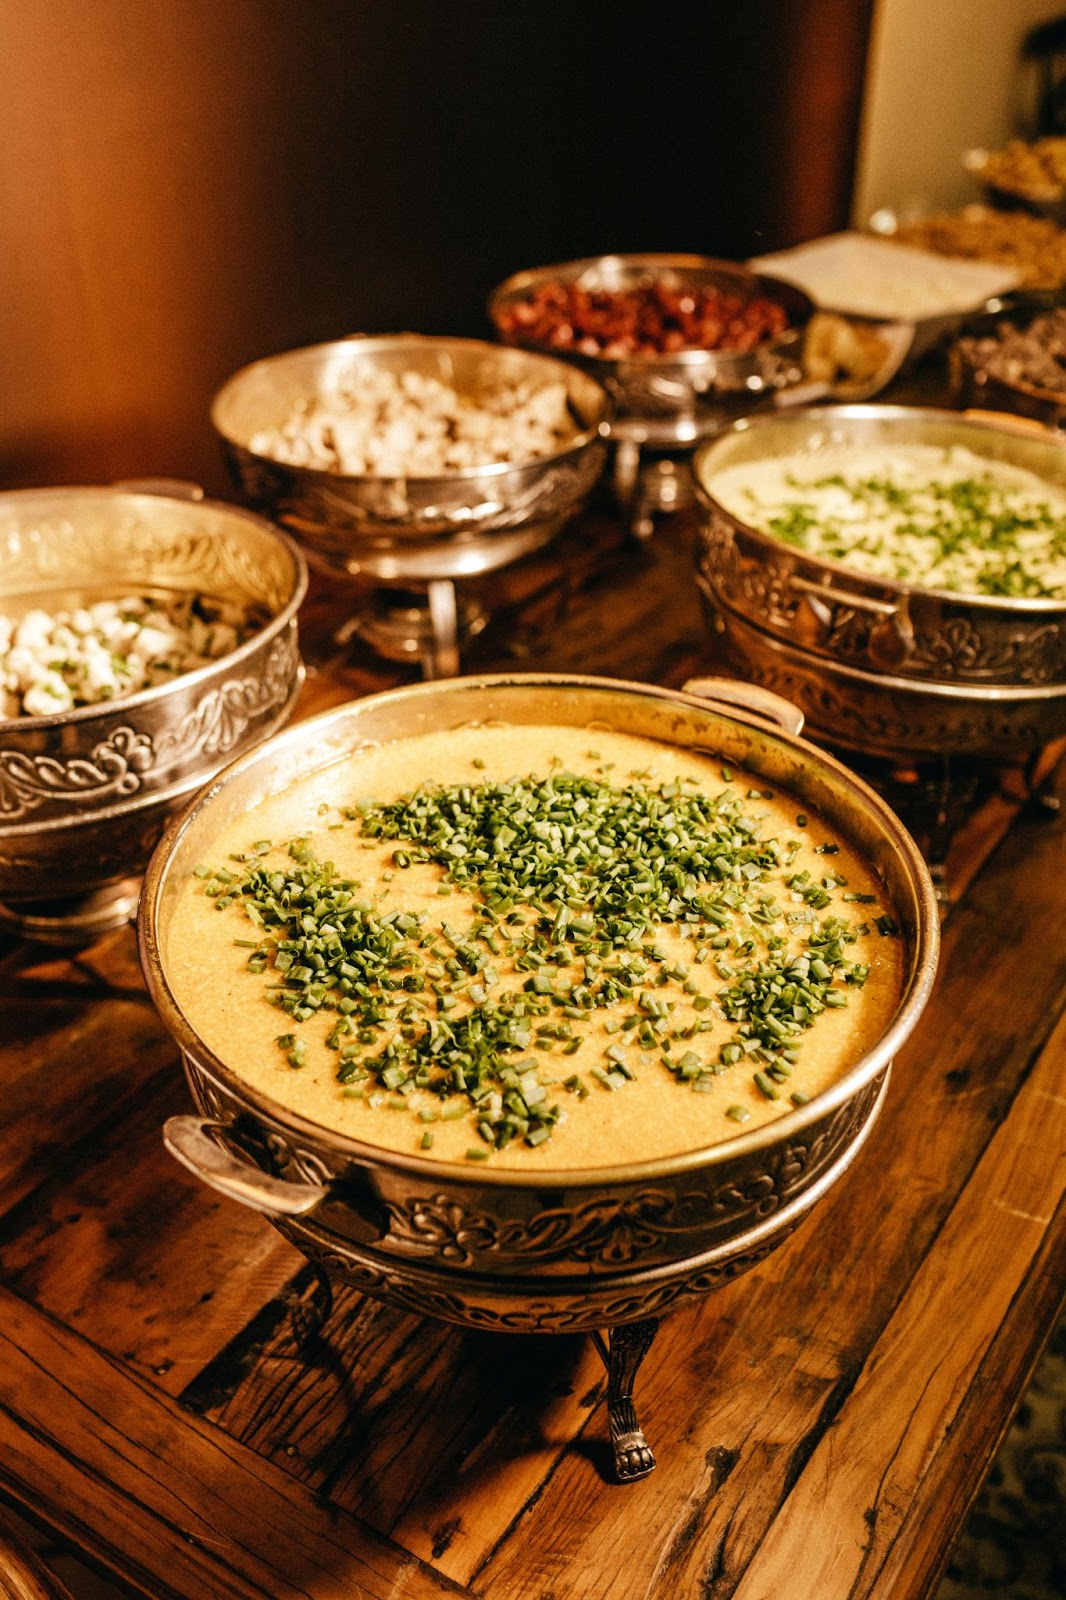 A variety of curries displayed in beautiful traditional serving dishes